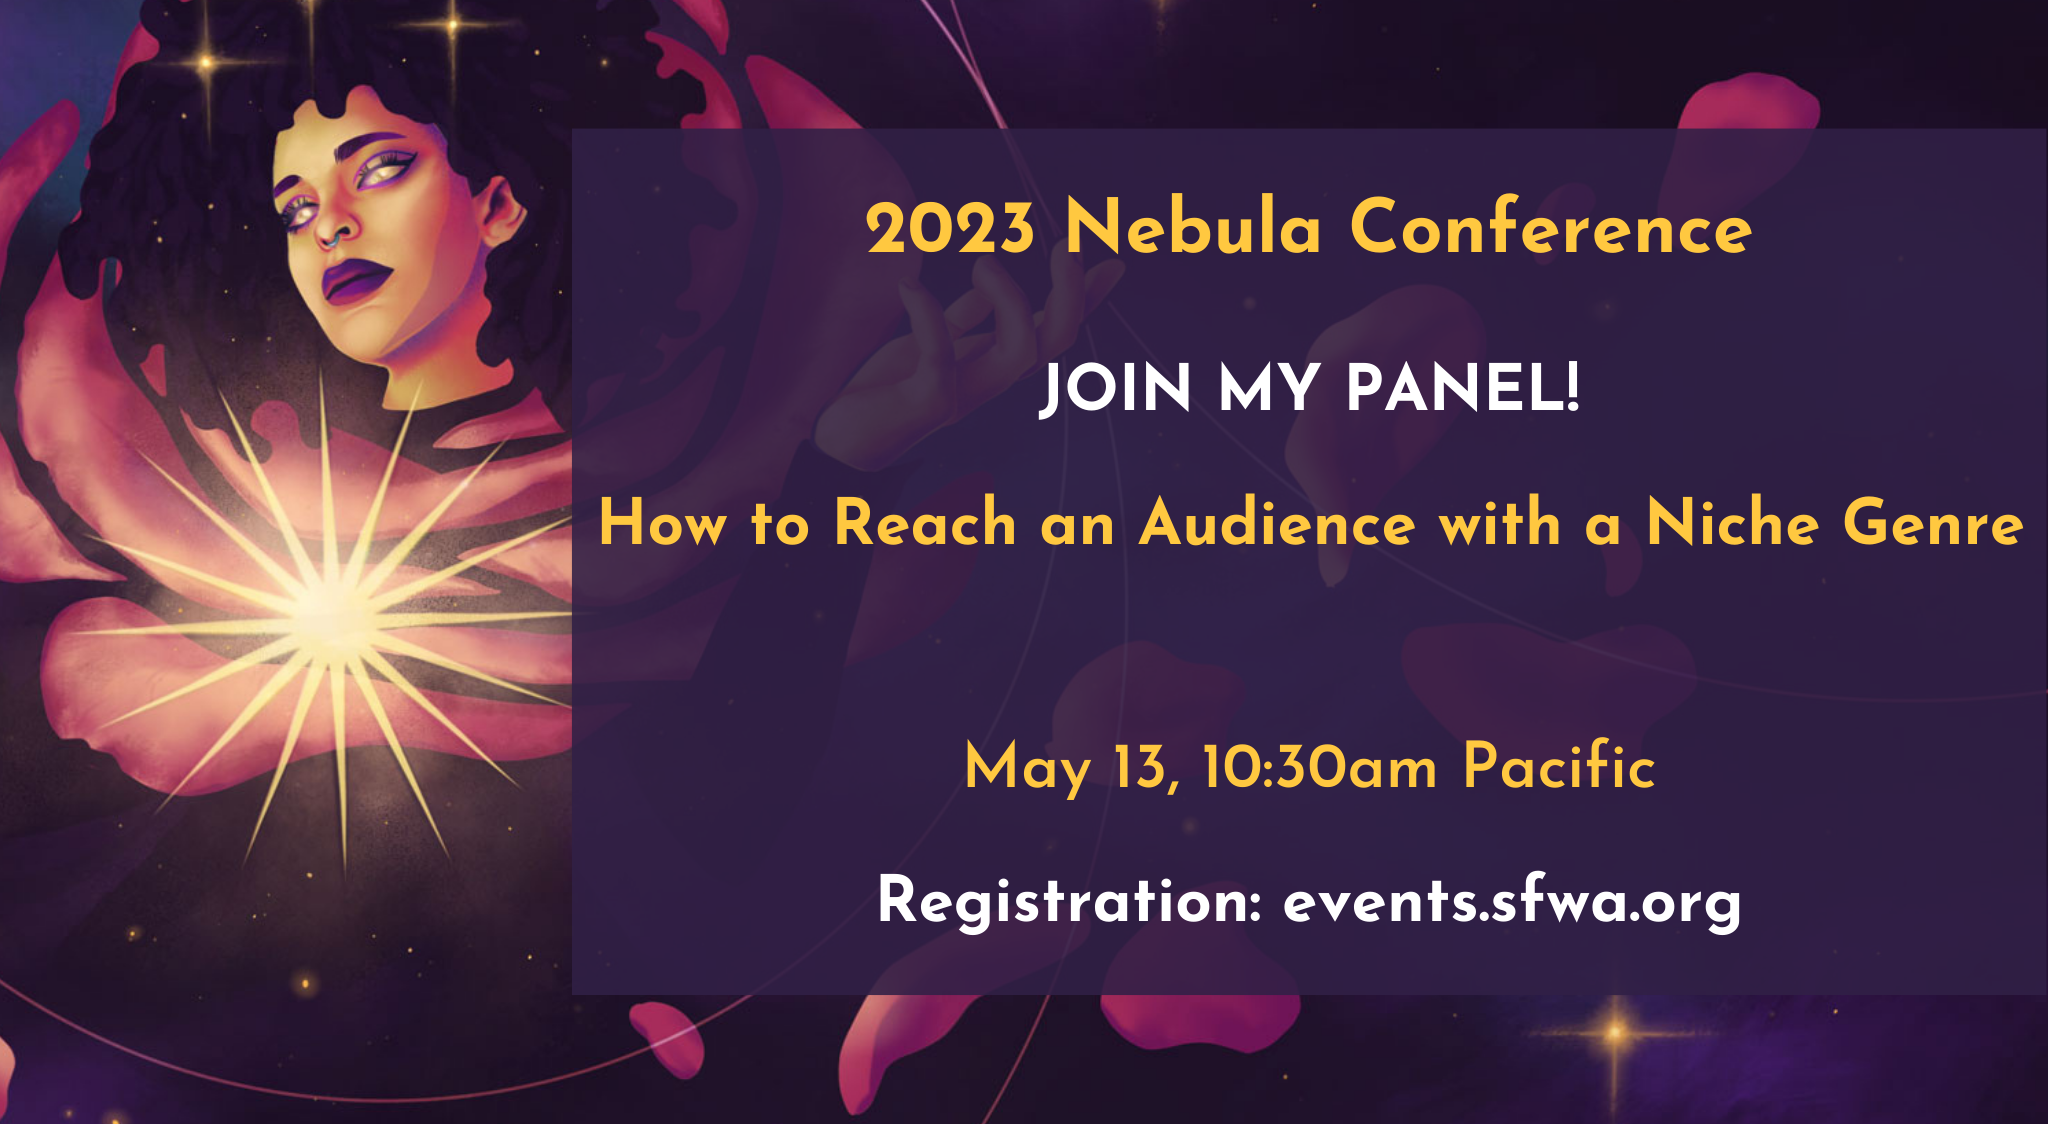 An infographic reading: "2023 Nebula Conference, Join My Panel! How to Reach an Audience with a Niche Genre, May 13, 10:30 am Pacific, Registration: events.sfwa.org". In the infographic background is an illustration of a Black woman with stars in her hair.